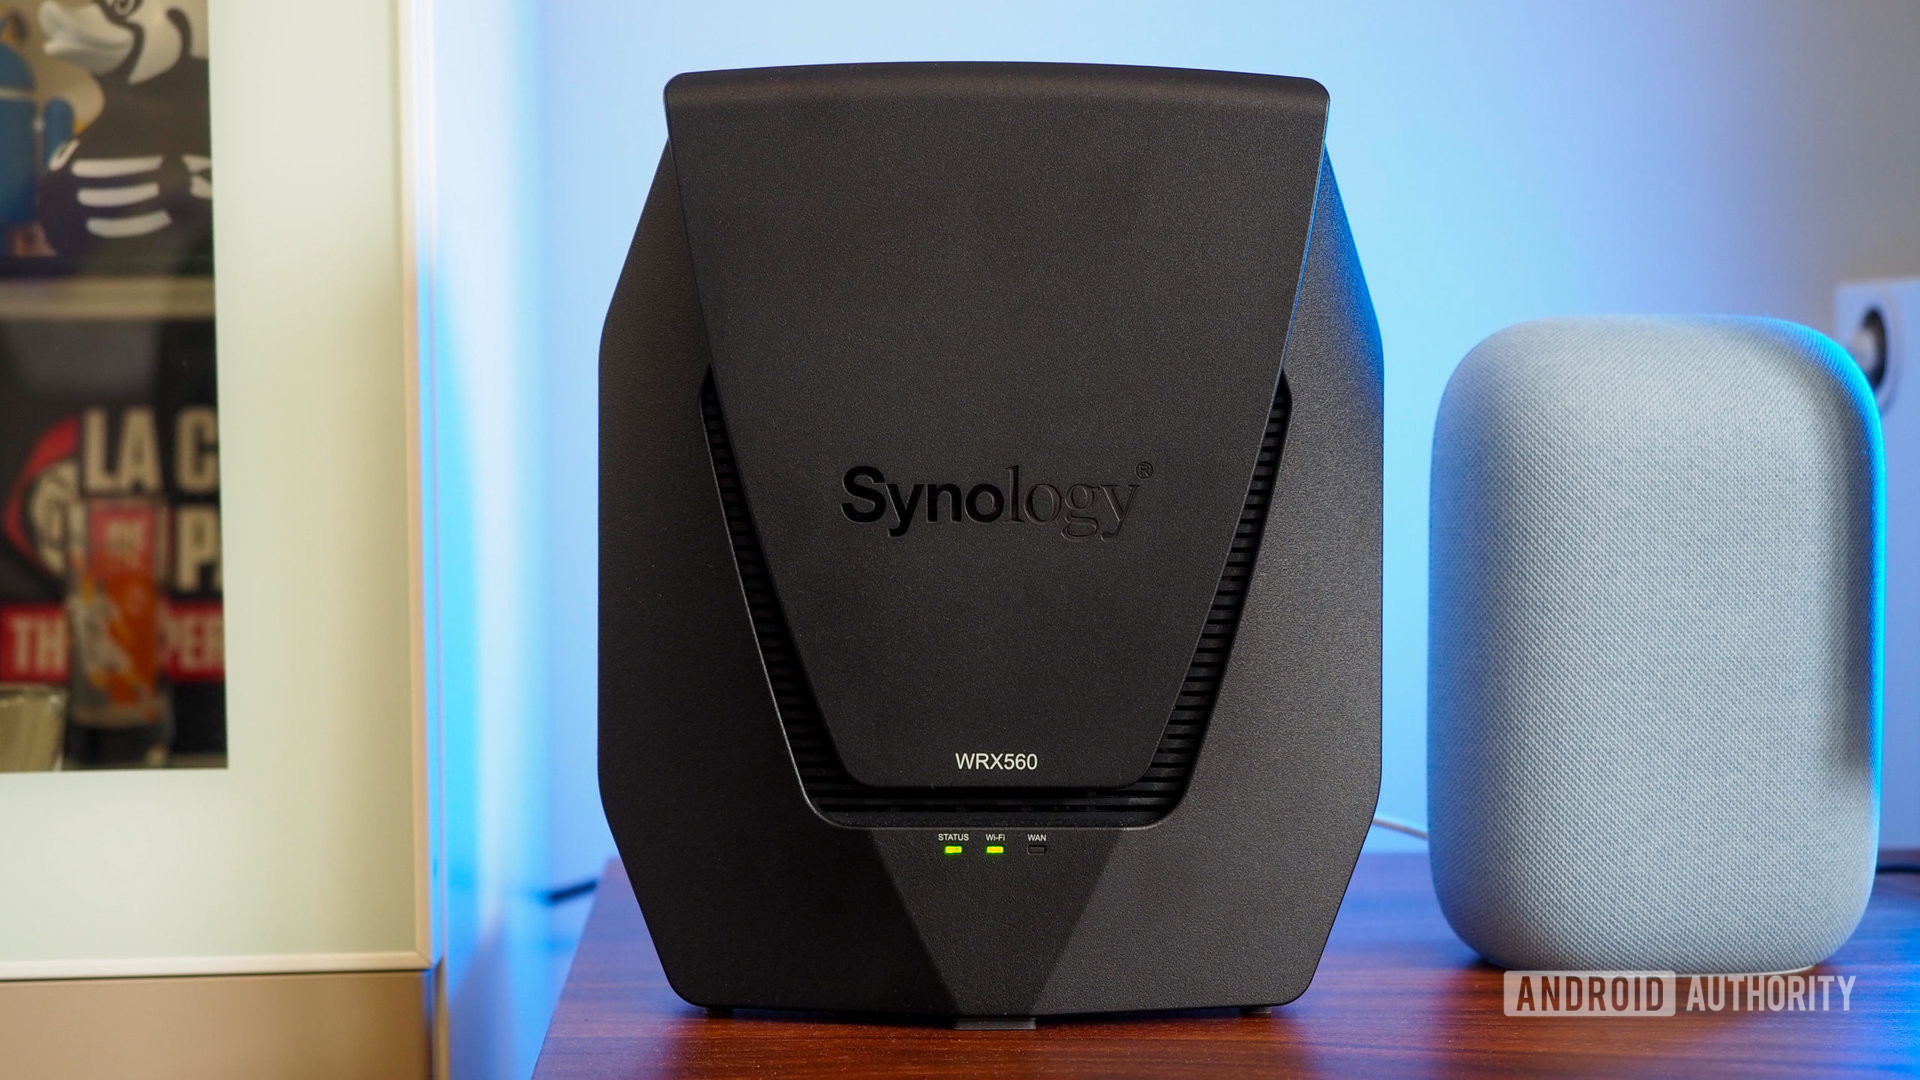 Synology WRX560 router next to a Google Nest Audio with a blue light in the background